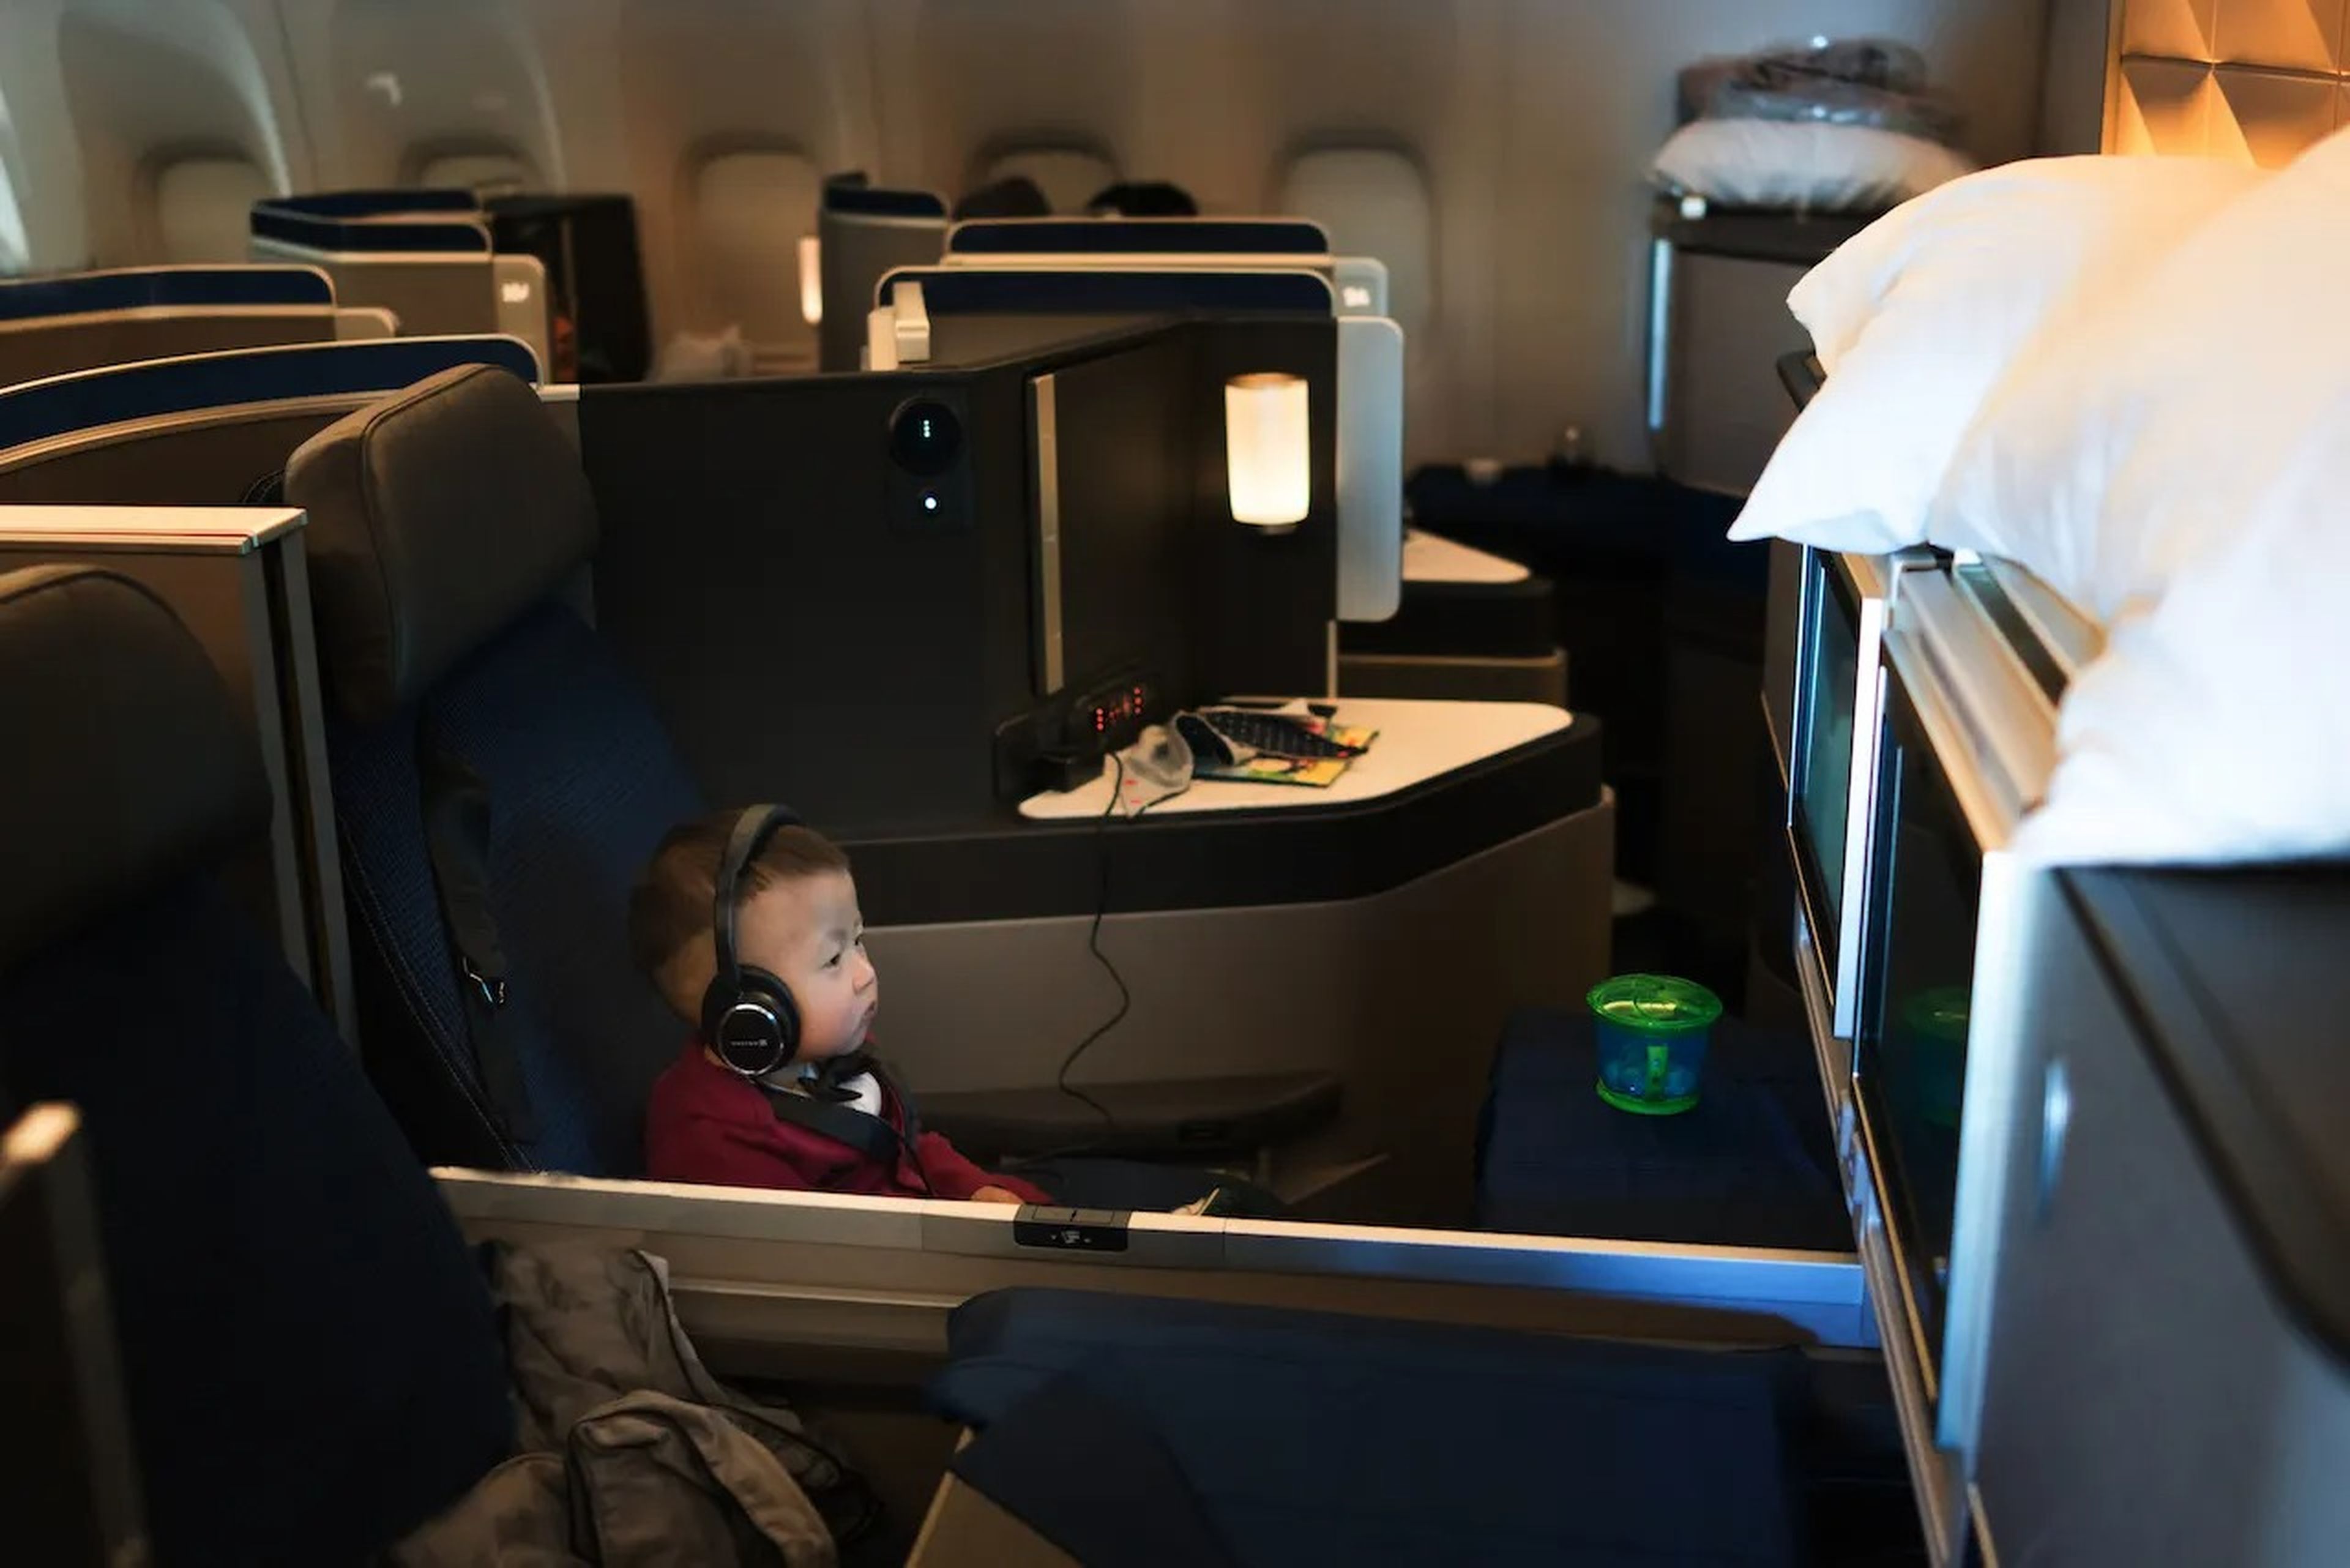 Toddlers cause flight attendants more of a headache than infants in business class.